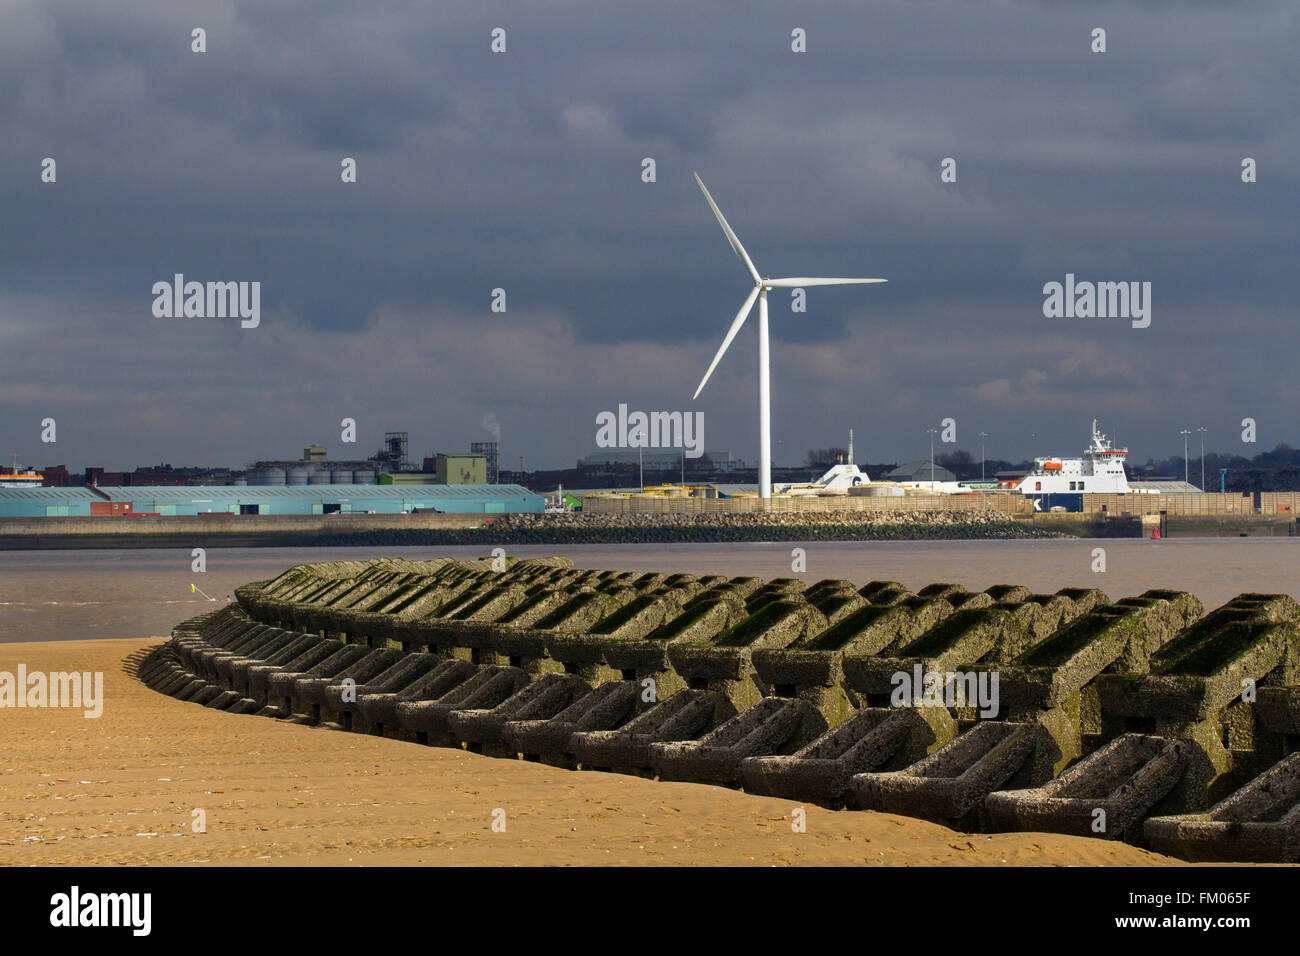 Low water exposes the Sea defences, showing a concrete pre-formed groyne installed to calm the waters at the estuary on the River Mersey, New Brighton, Wallasey, Wirral, Merseyside, UK Stock Photo